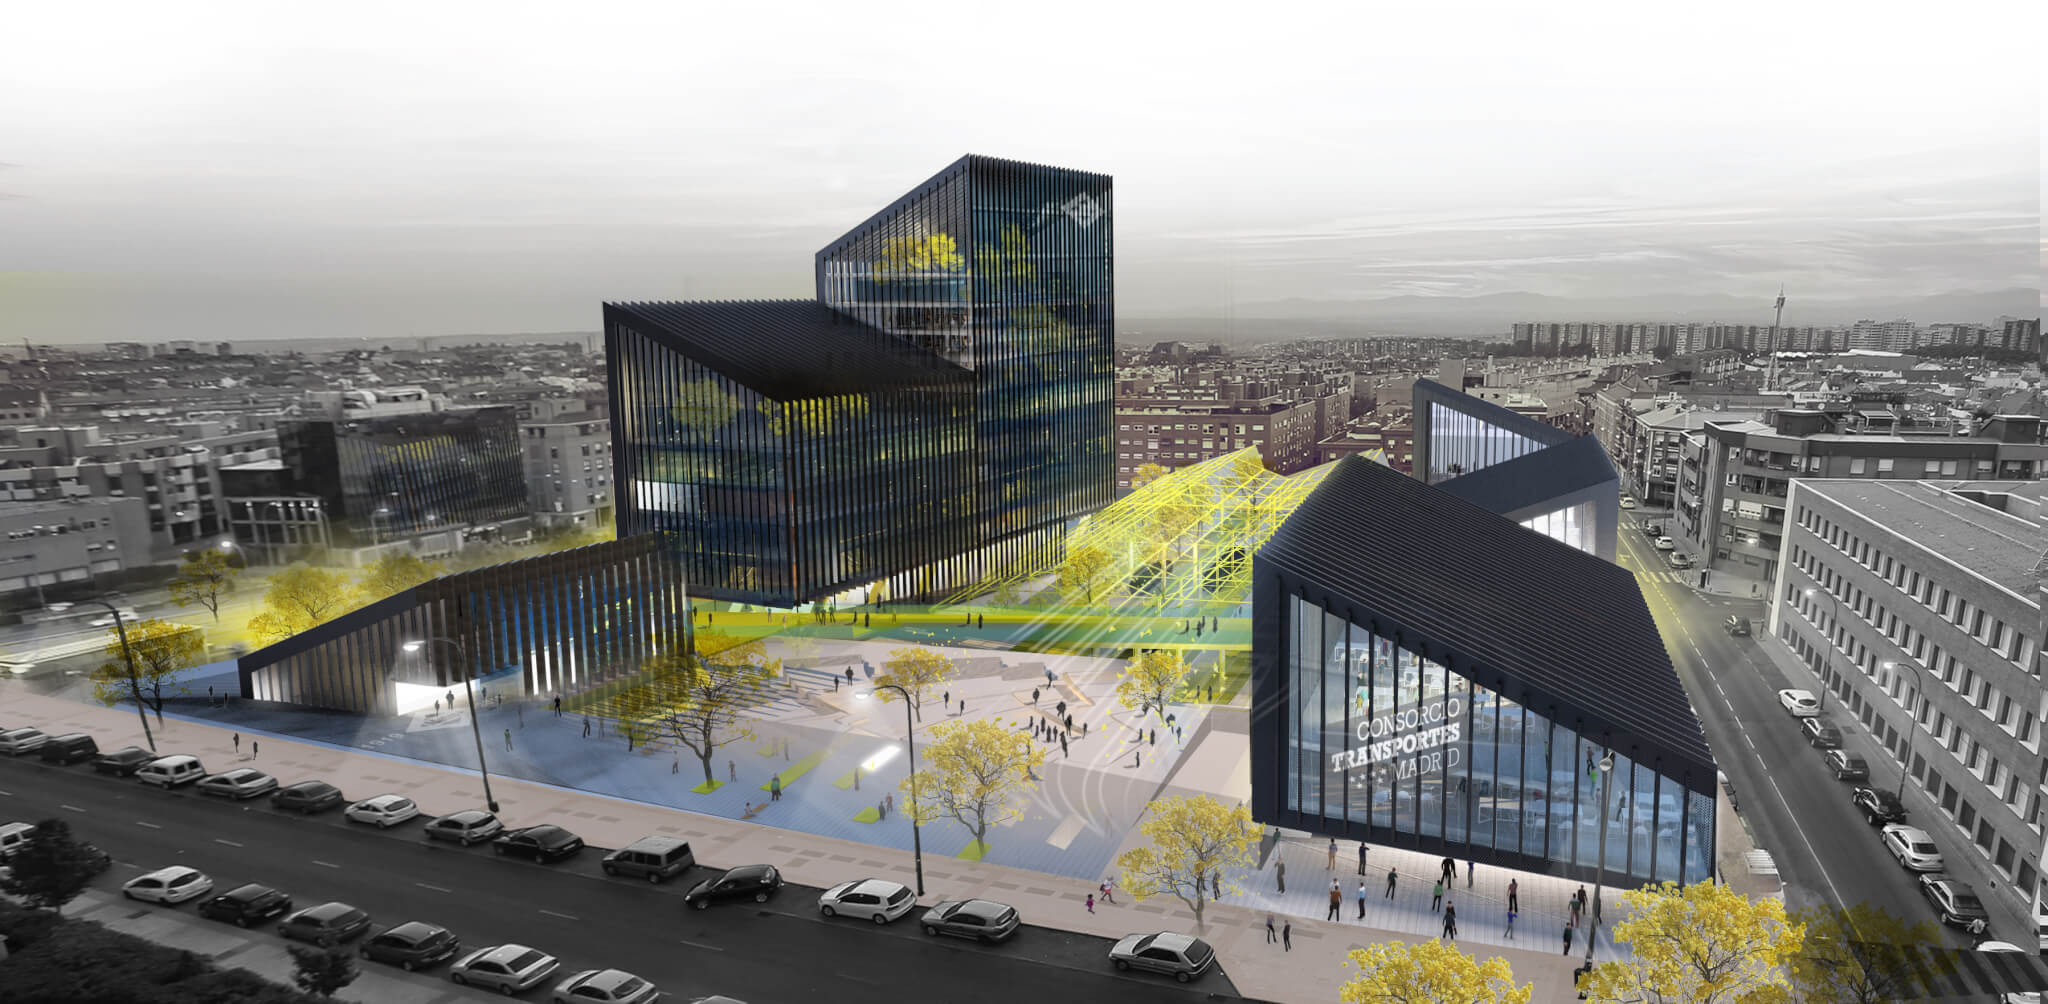 Rendering of an office and cultural complex